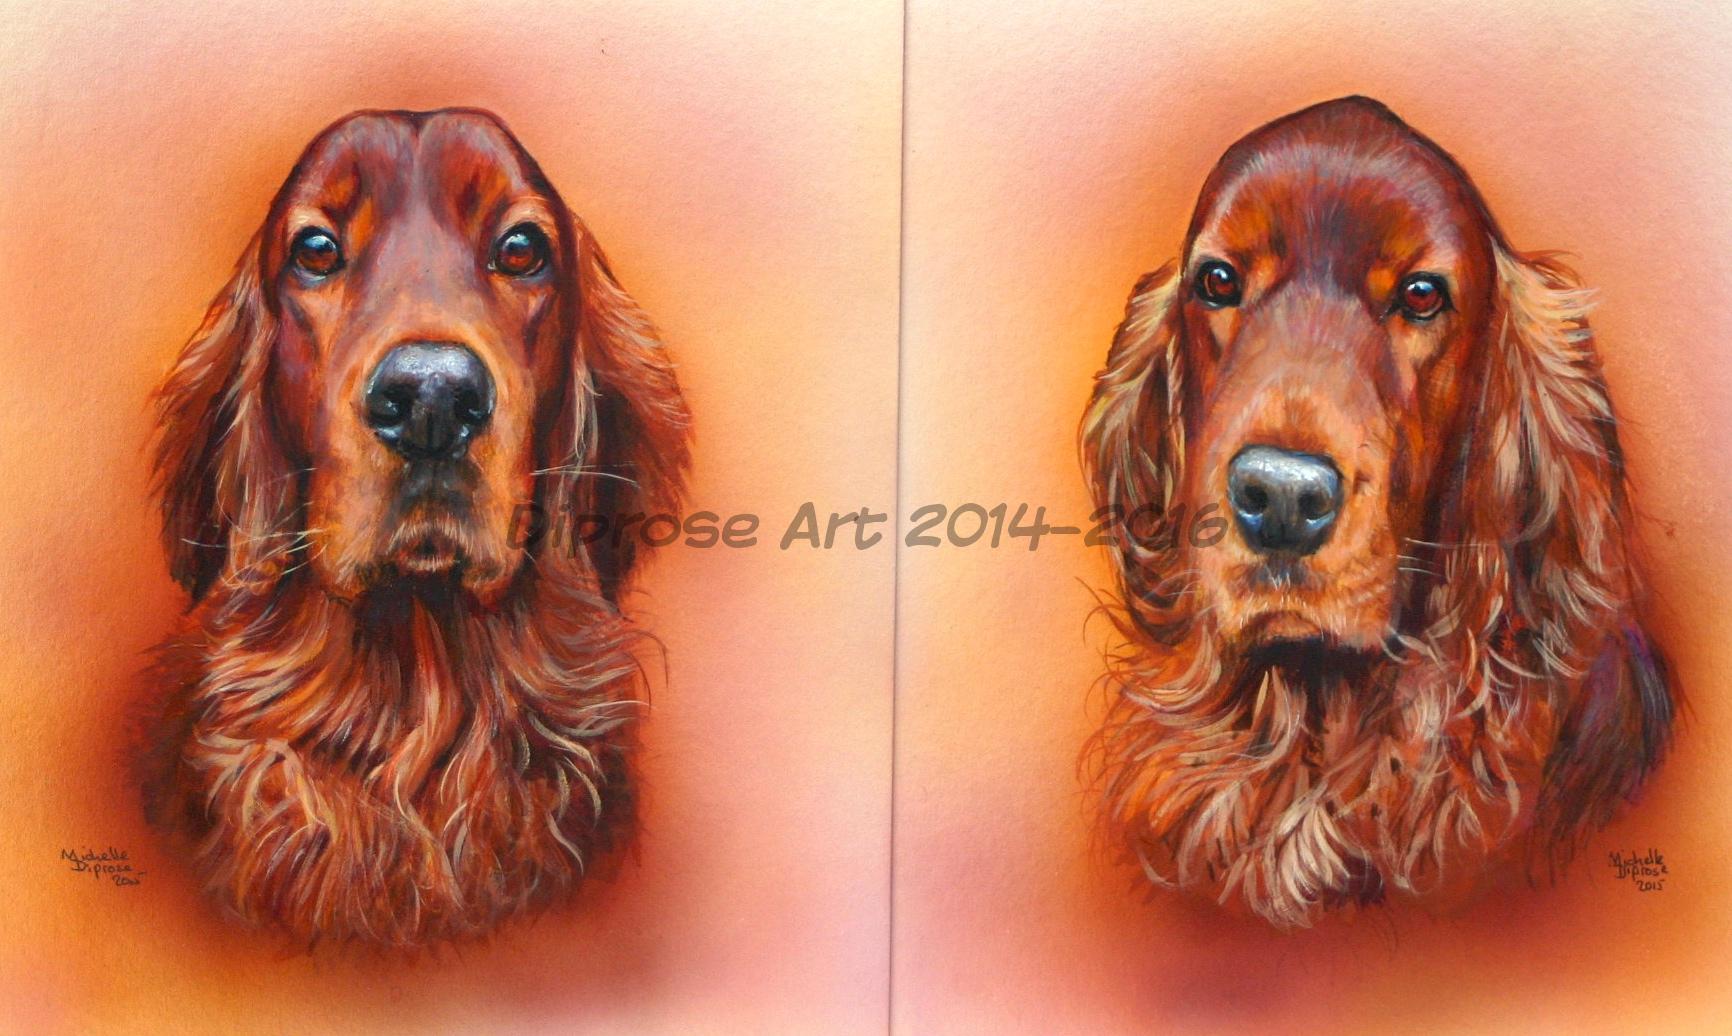 Acrylics on board - approx A4 x2 - pet dog portraits - This was a commission for a matched pair of paintings - these boys have great expressions and were a lovely colour to paint